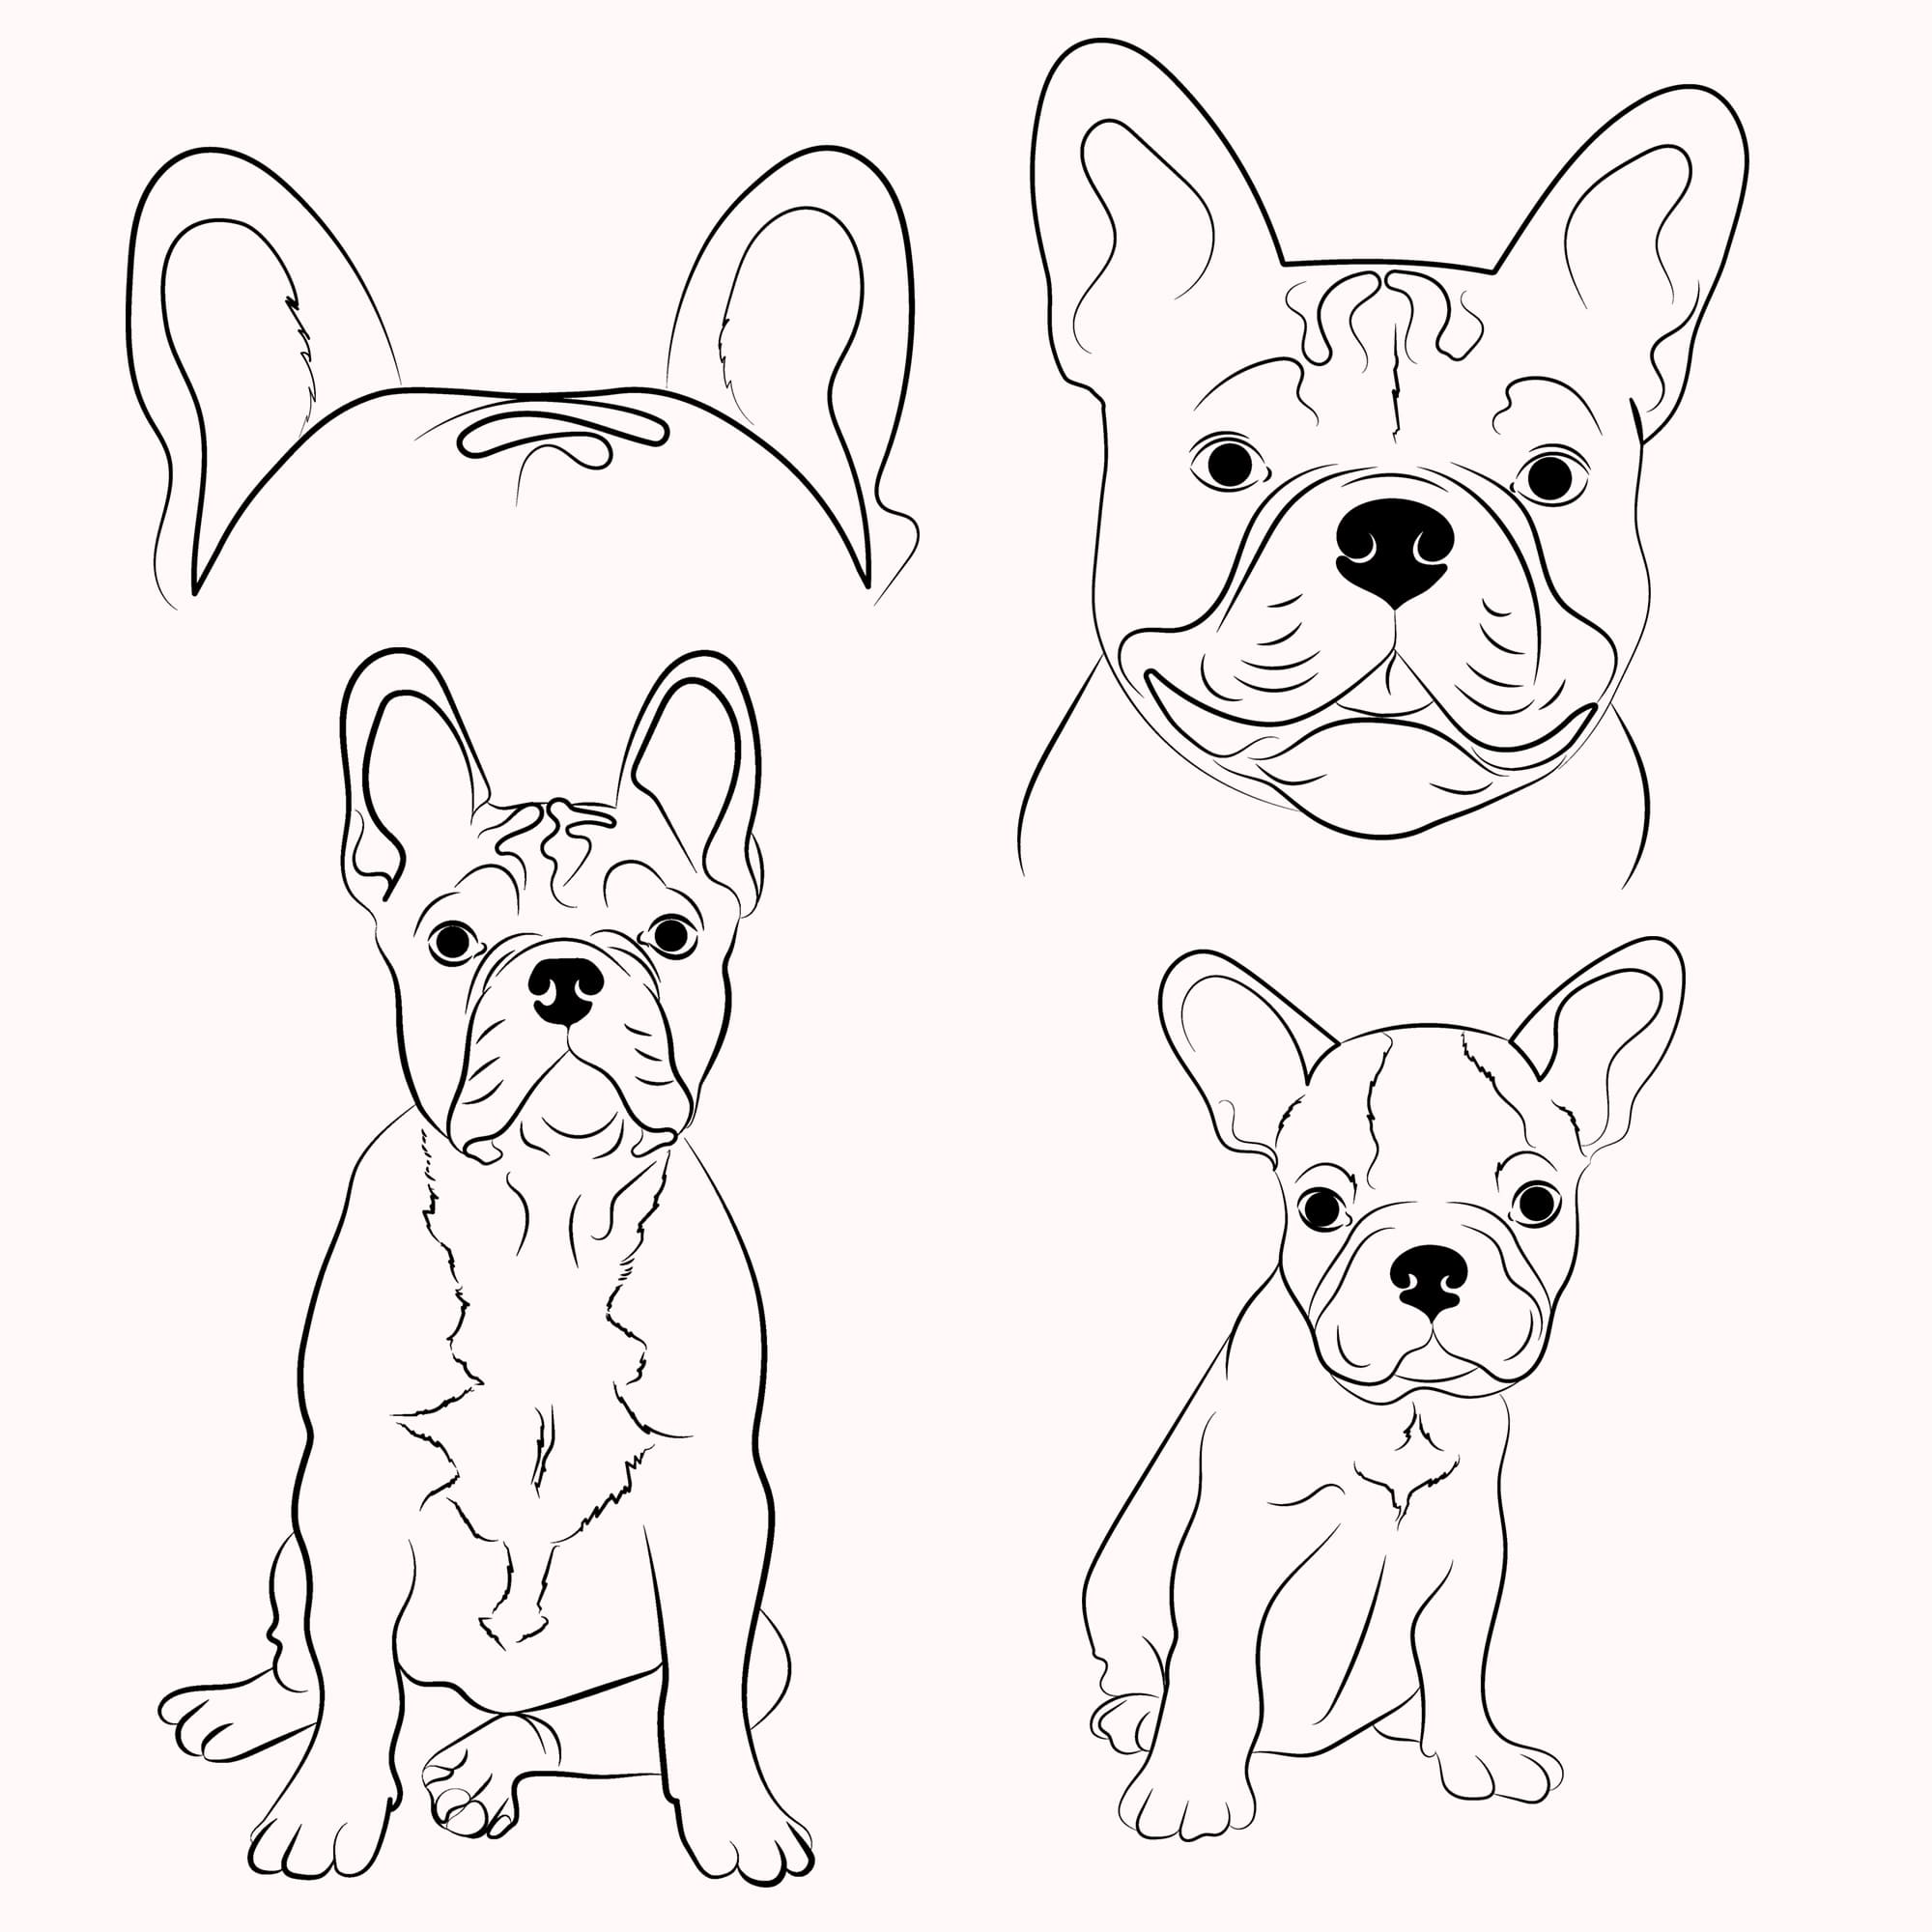 Drawing of a dog's face with three different ears.